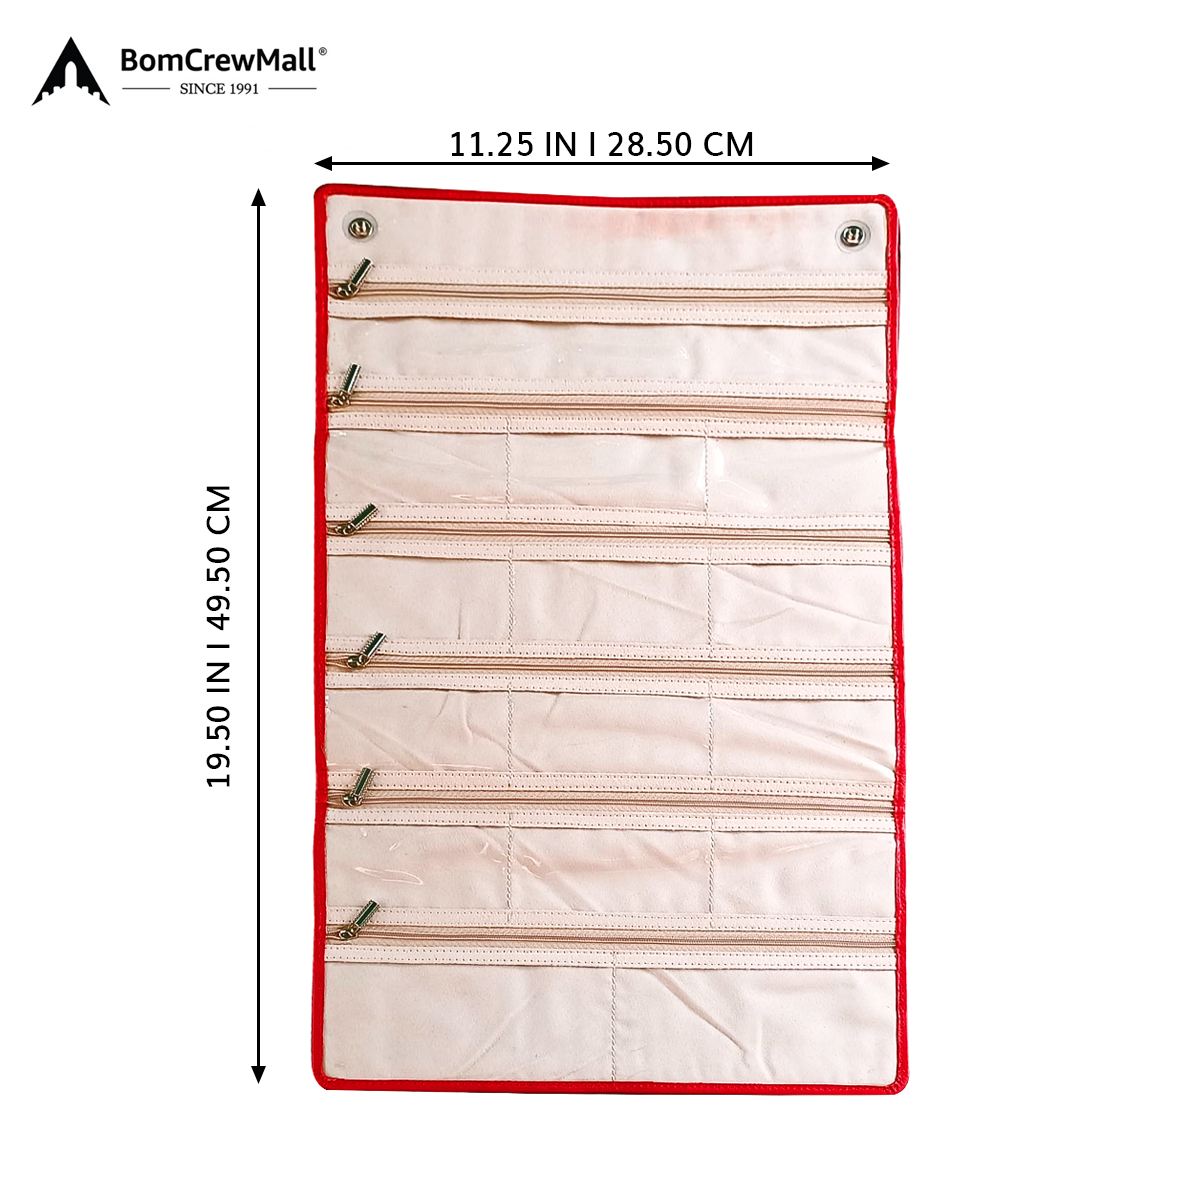 Image displays product with multiple zips and red borders